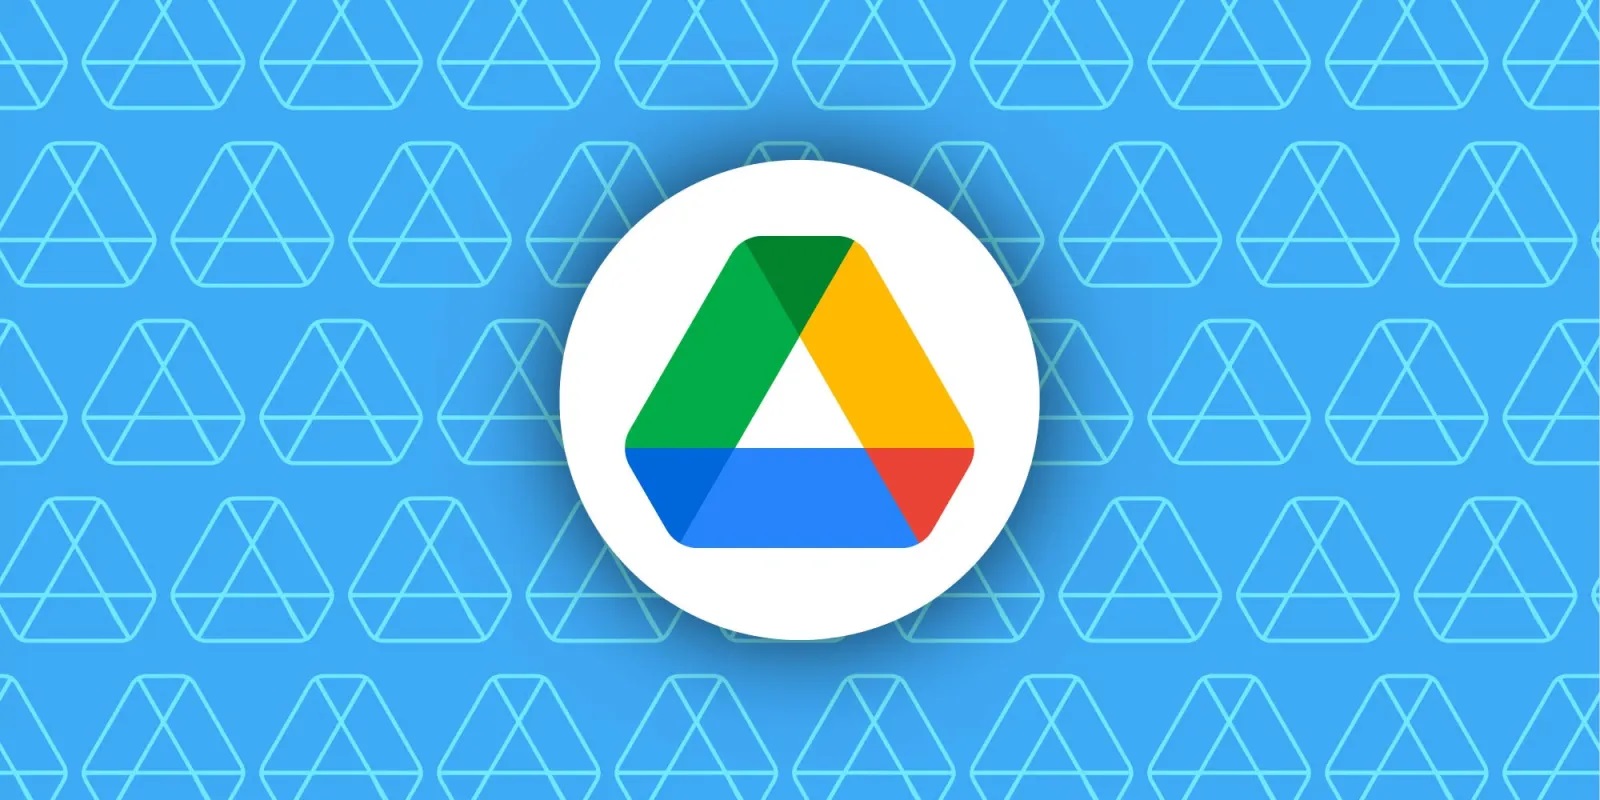 Google Drive for mobile has been revamped